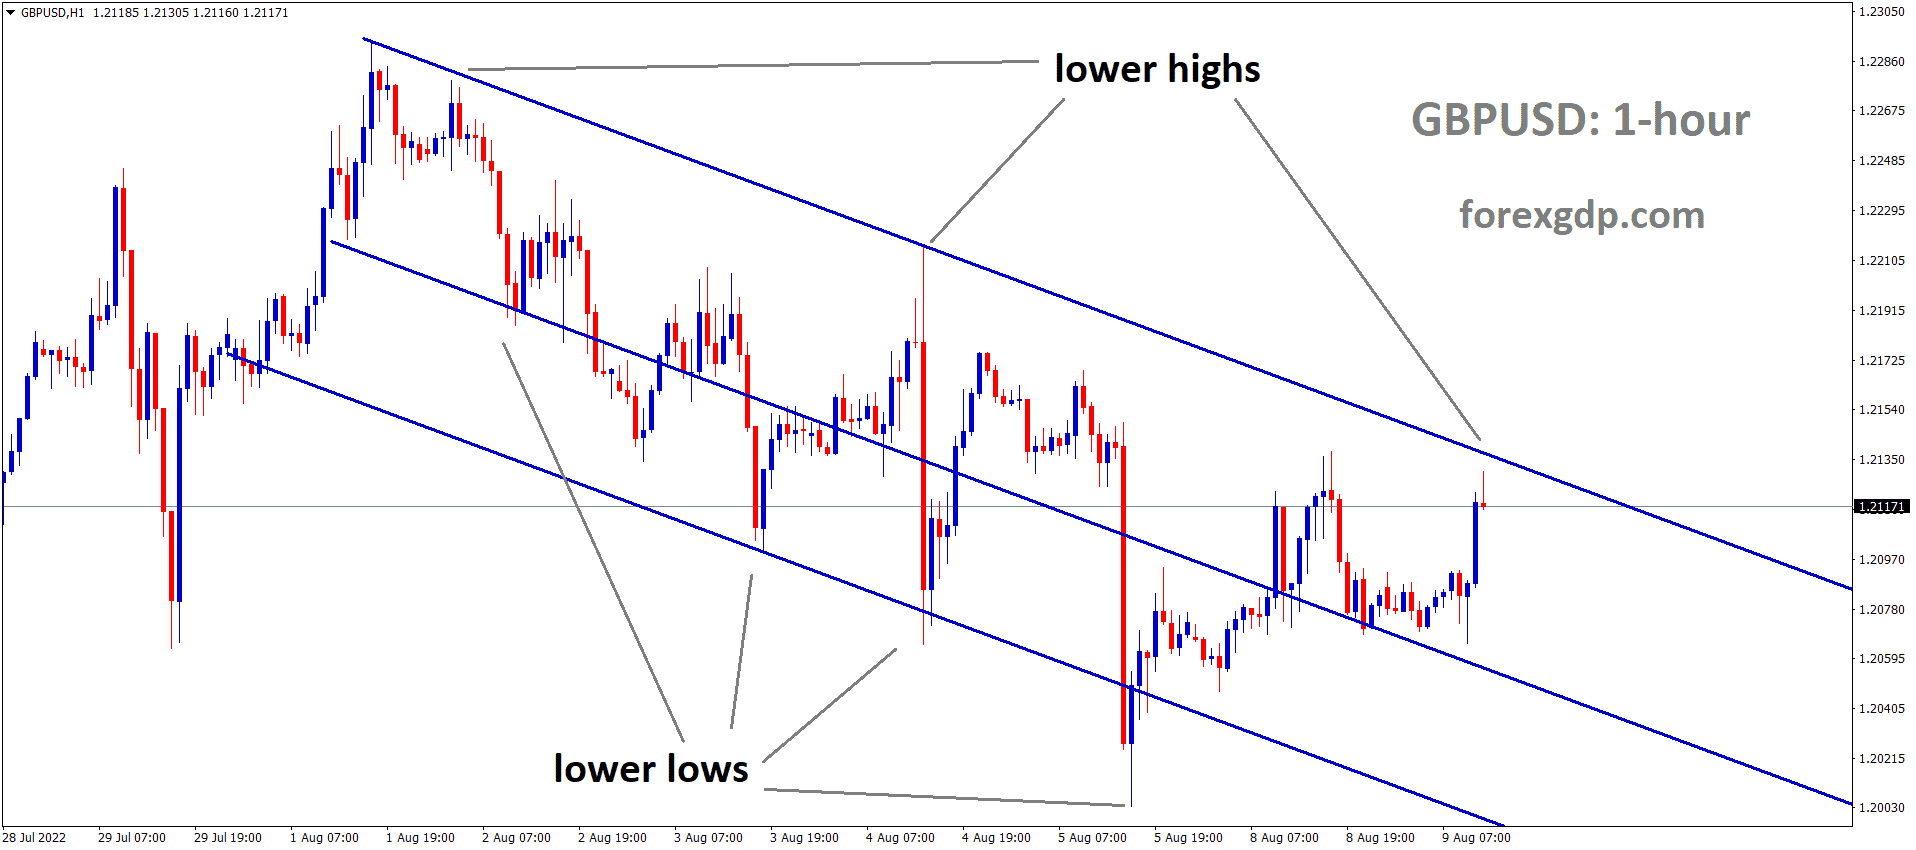 GBPUSD is moving in the Descending channel and the Market has fallen from the Lower high area of the channel 1